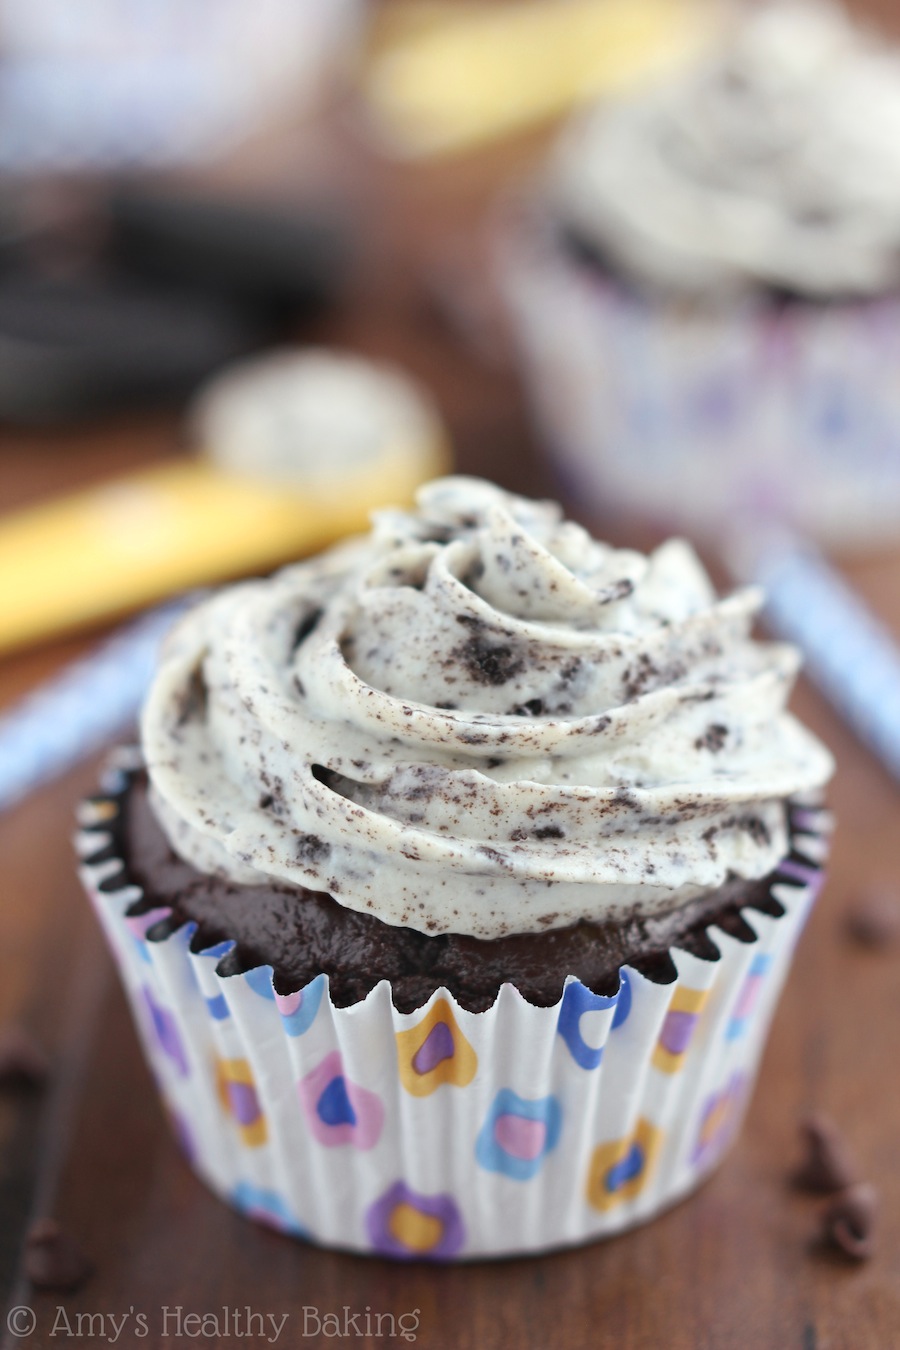 Cookies and Cream Cupcakes with Chocolate Frosting